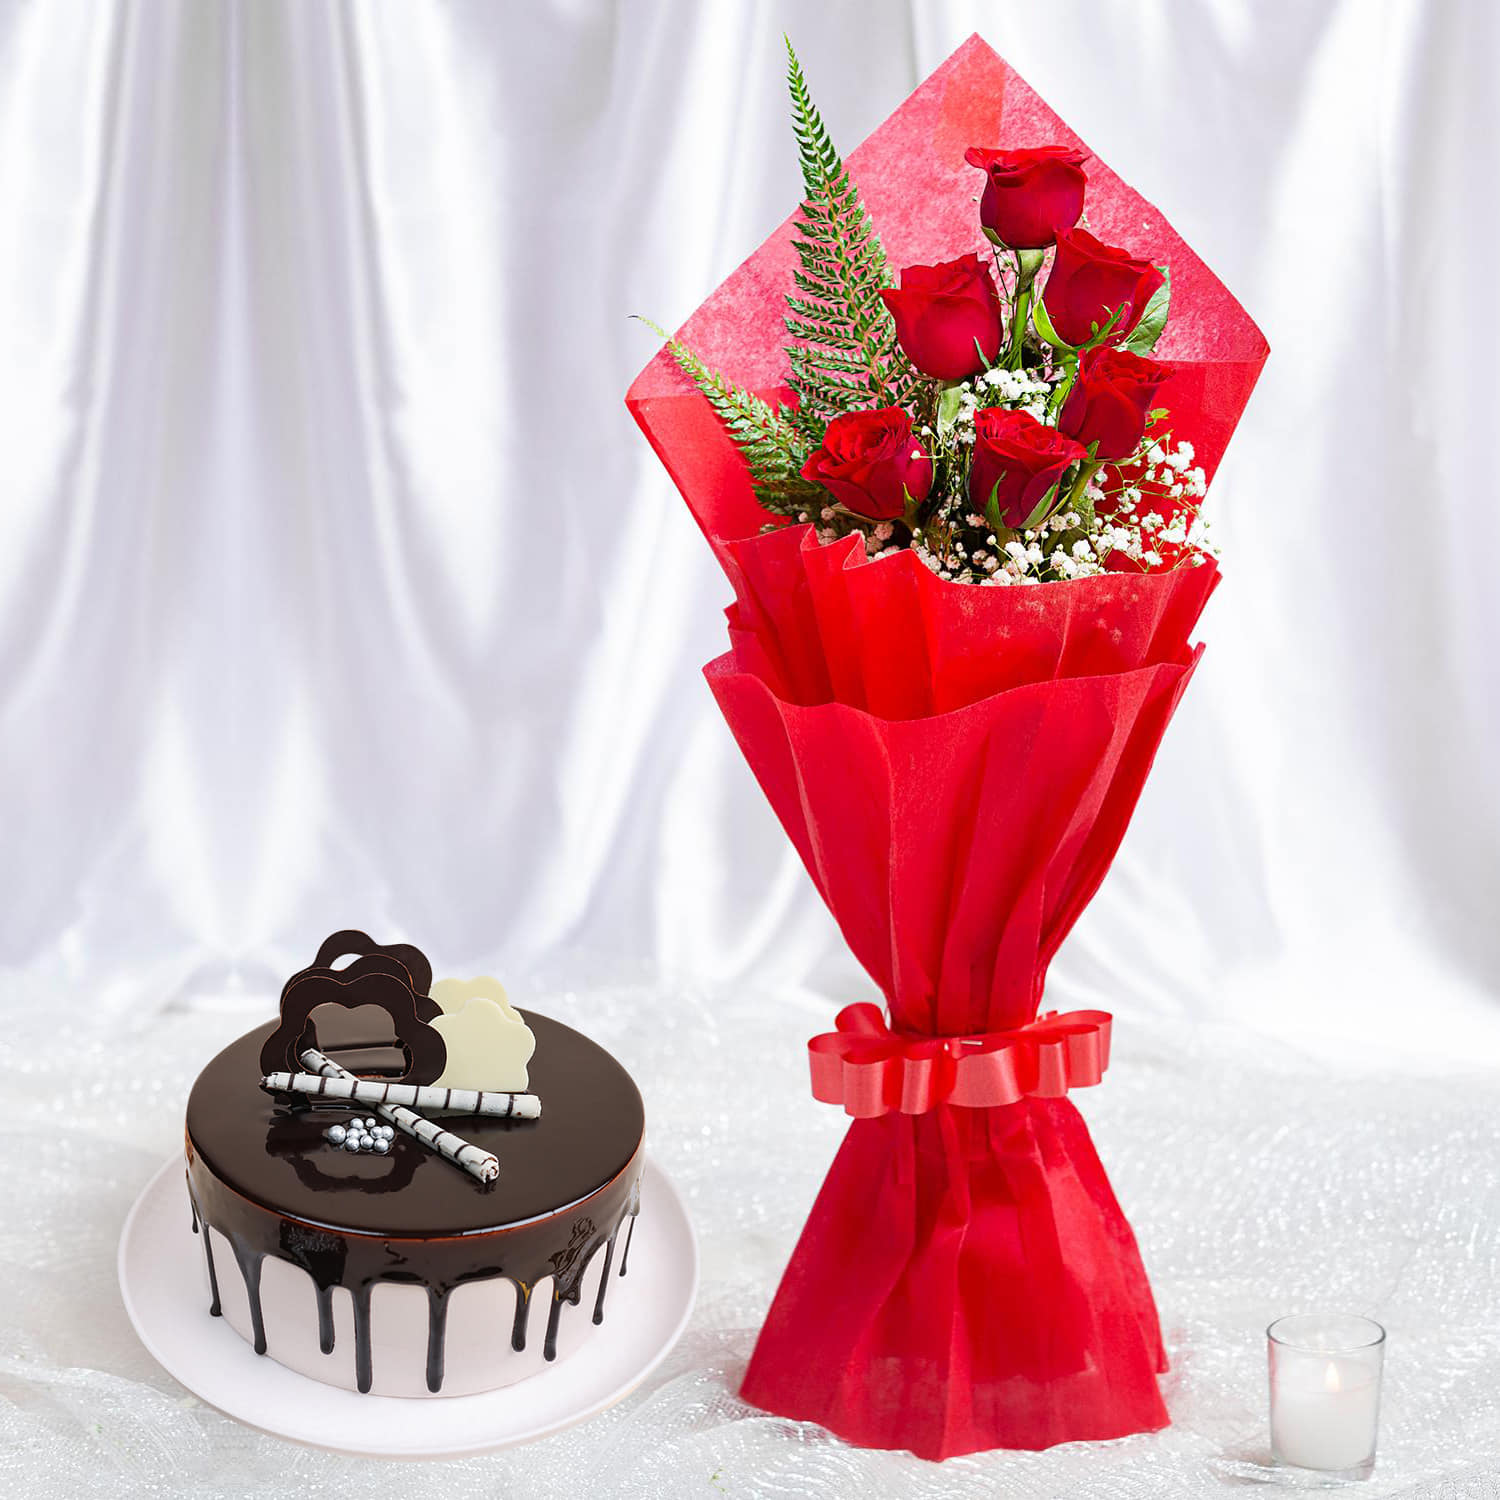 Send Gifts to Pune, Send Flowers to Pune, Cake to Pune